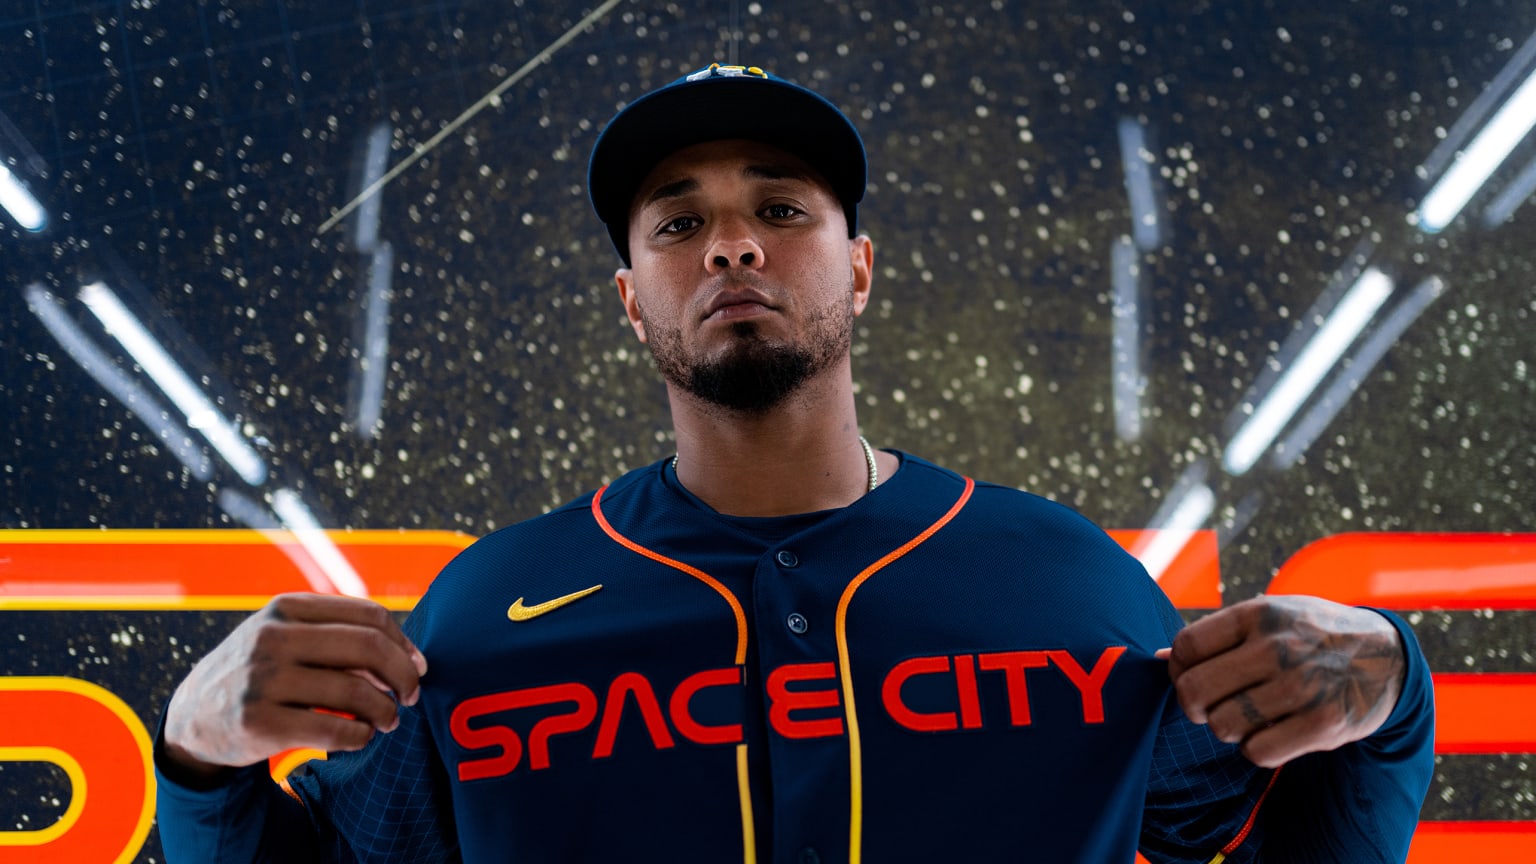 astros jersey mens space city